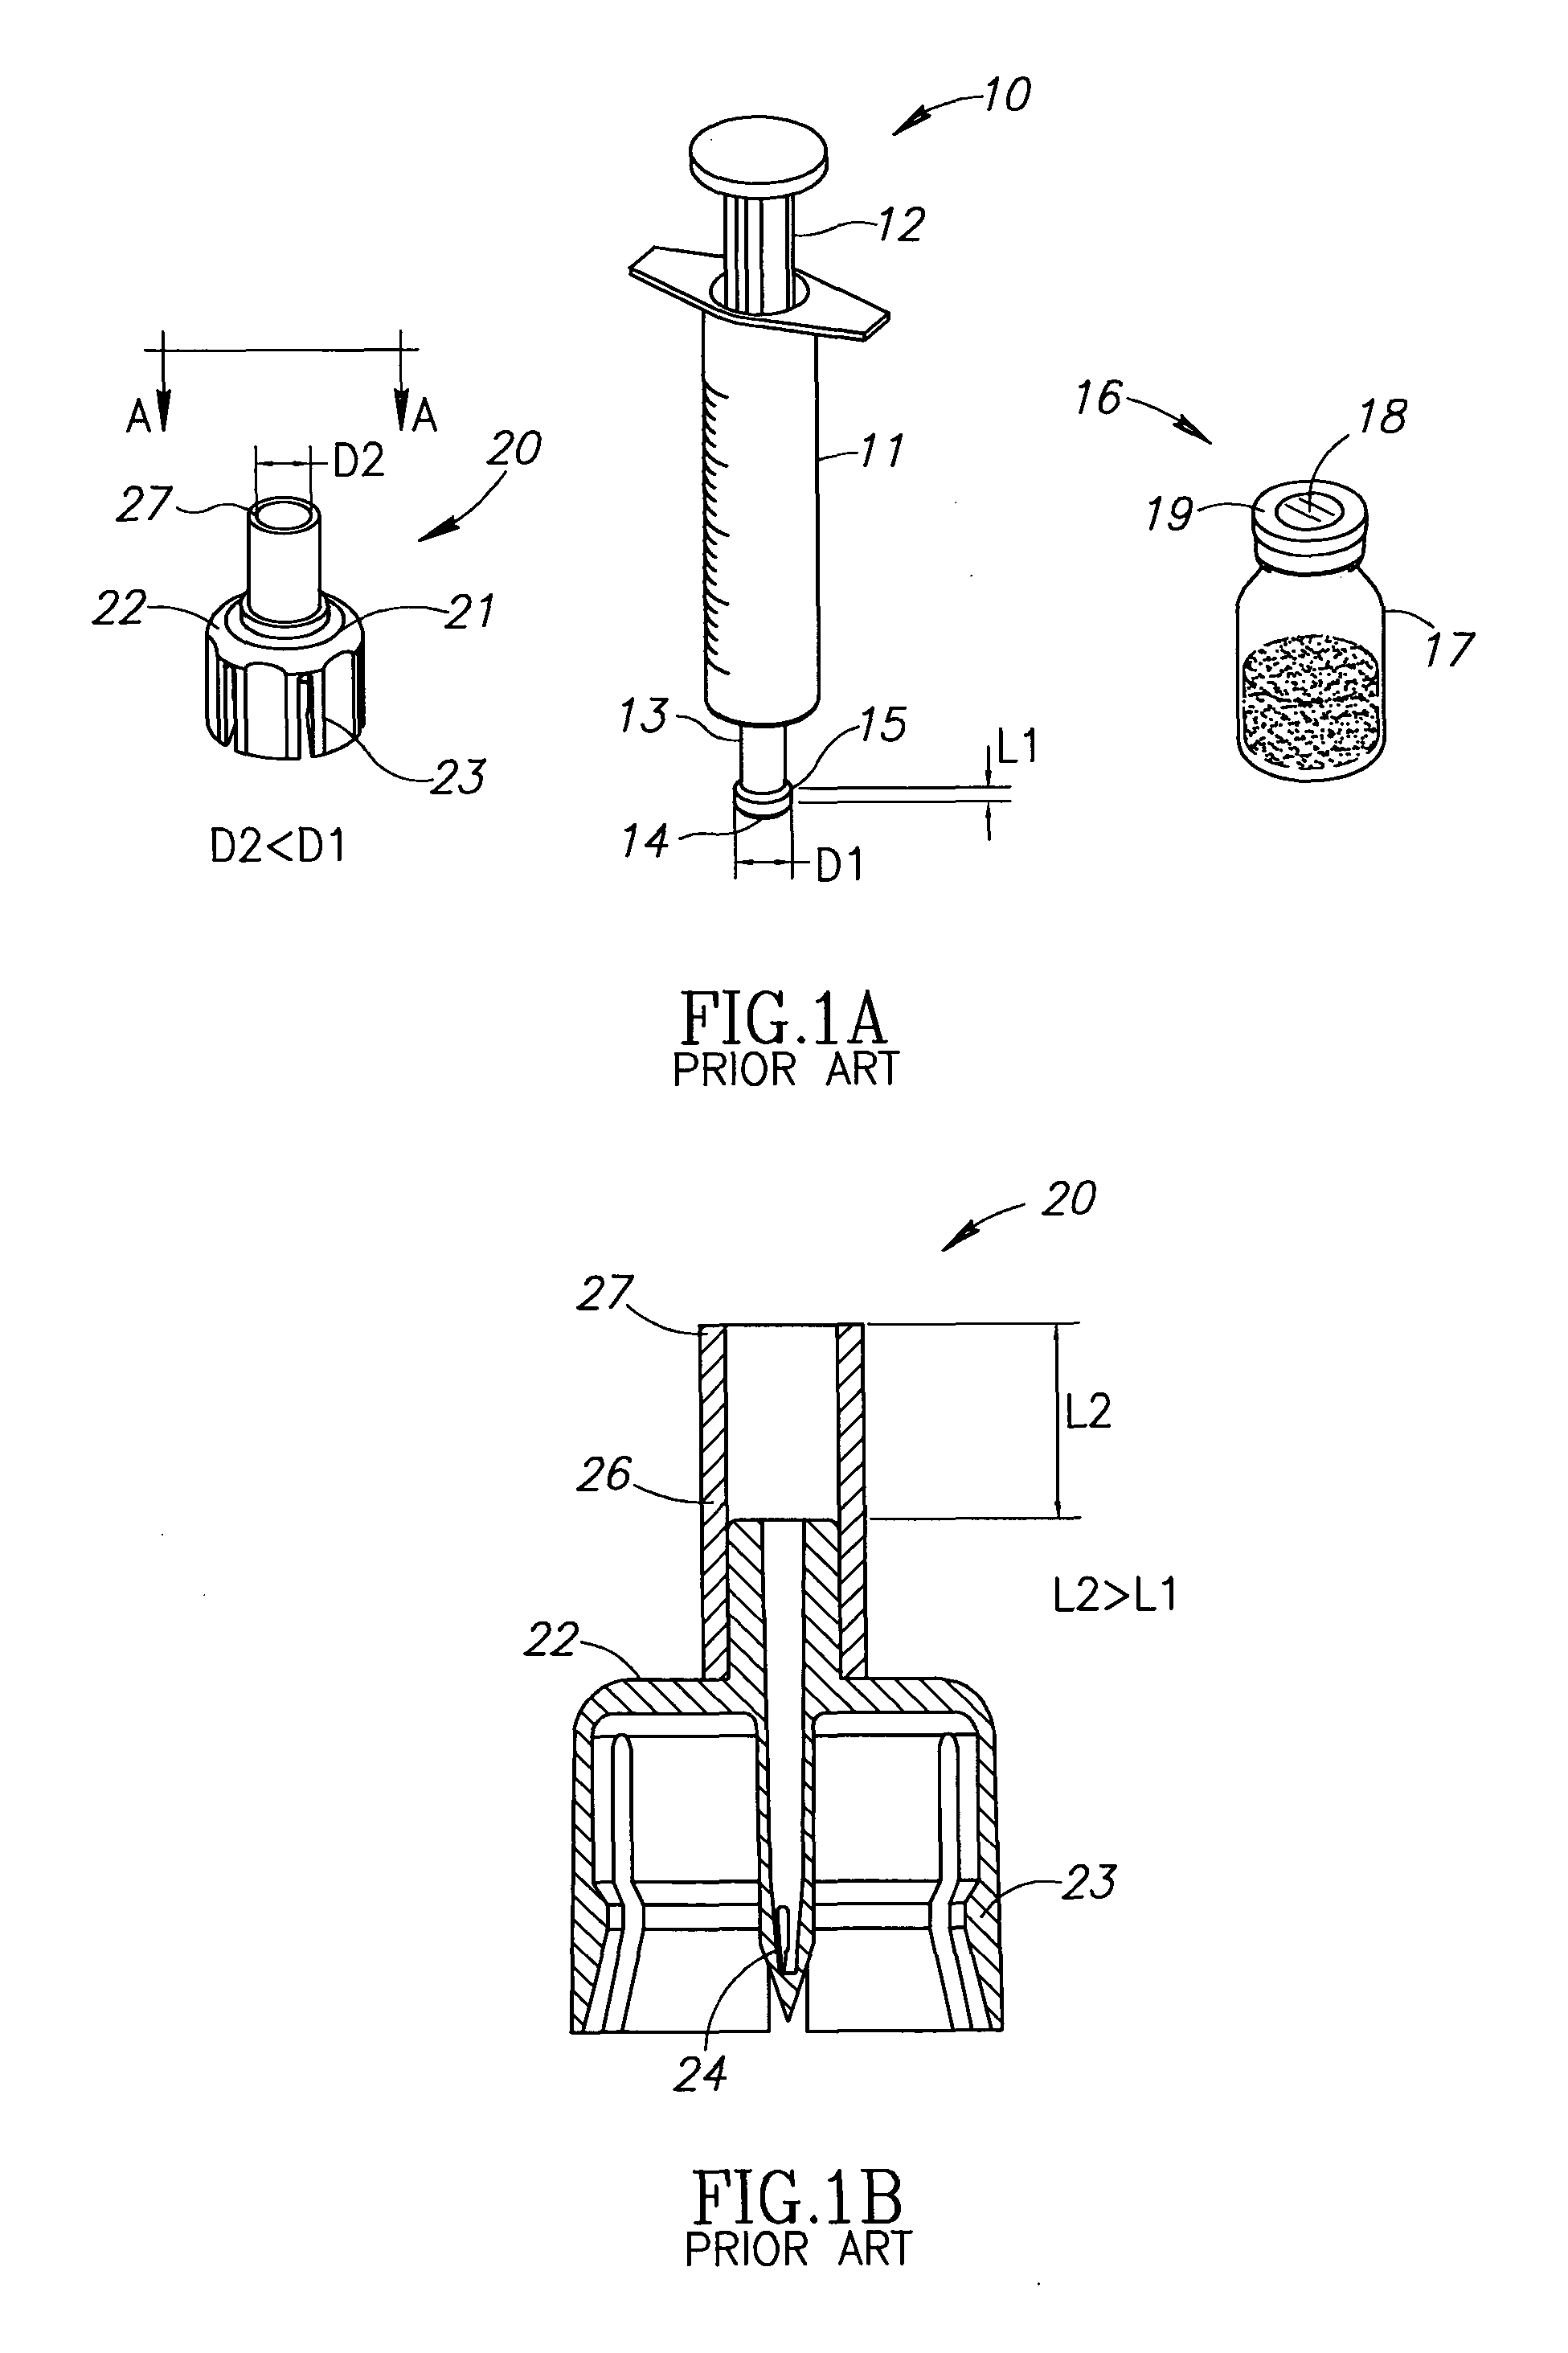 Liquid drug delivery devices for use with syringes with widened distal tips